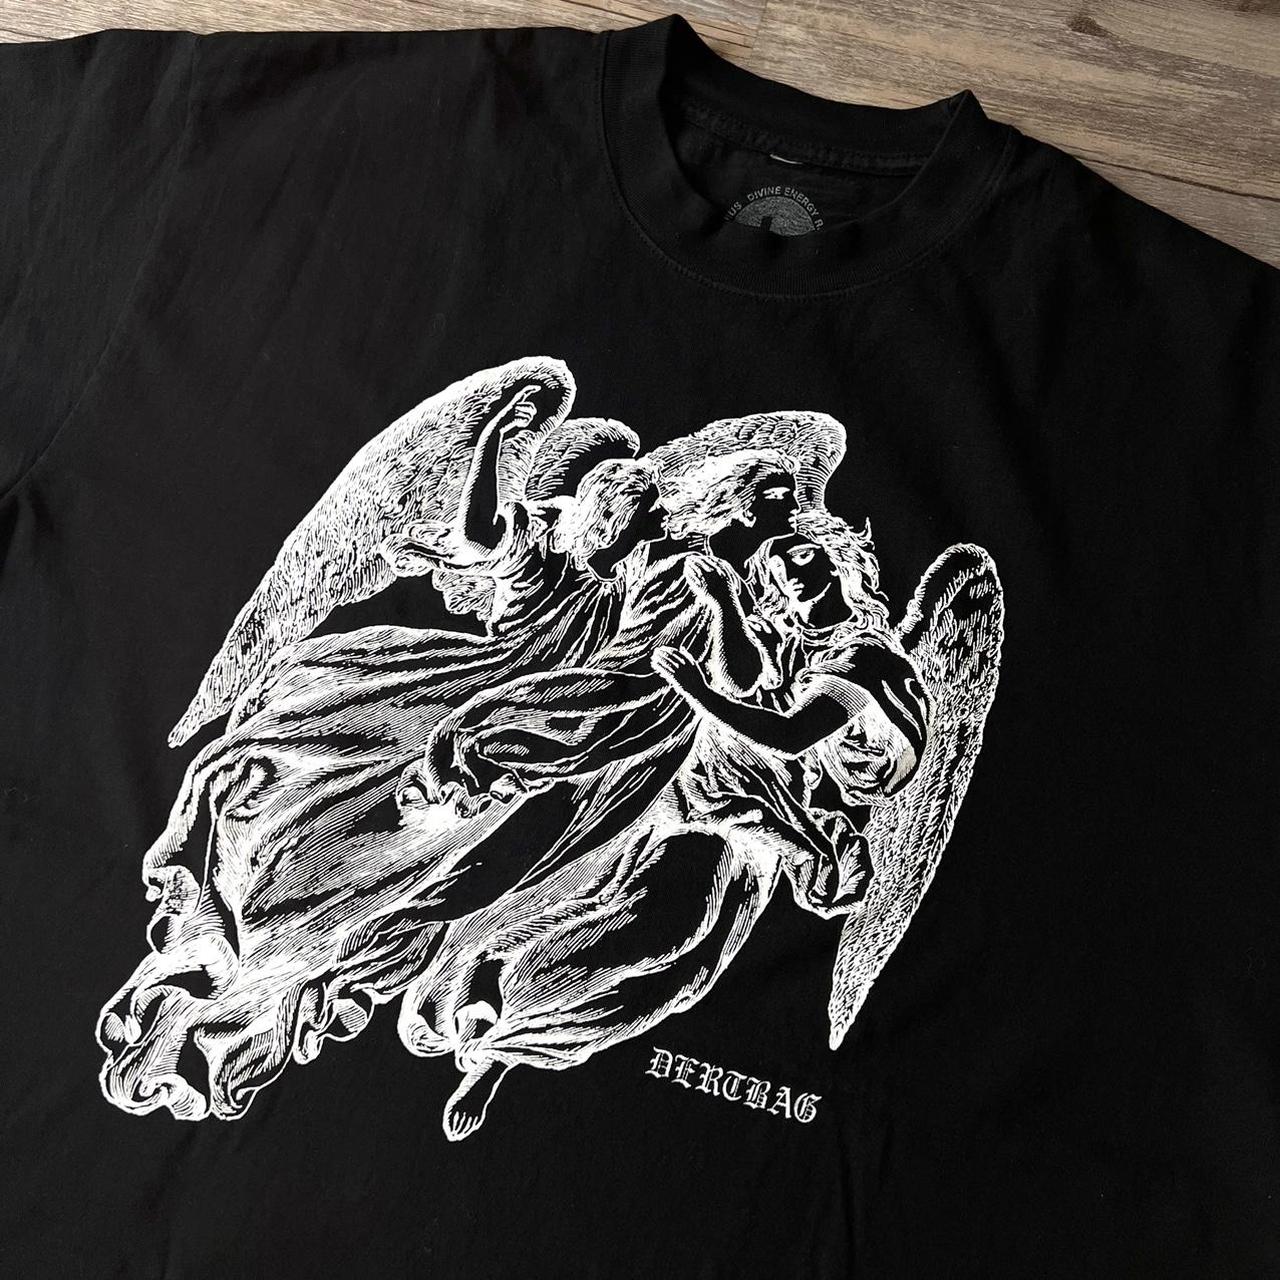 Product Image 1 - DERTBAG DIVINE ANGEL TEE
QUALITY HEAVYWEIGHT